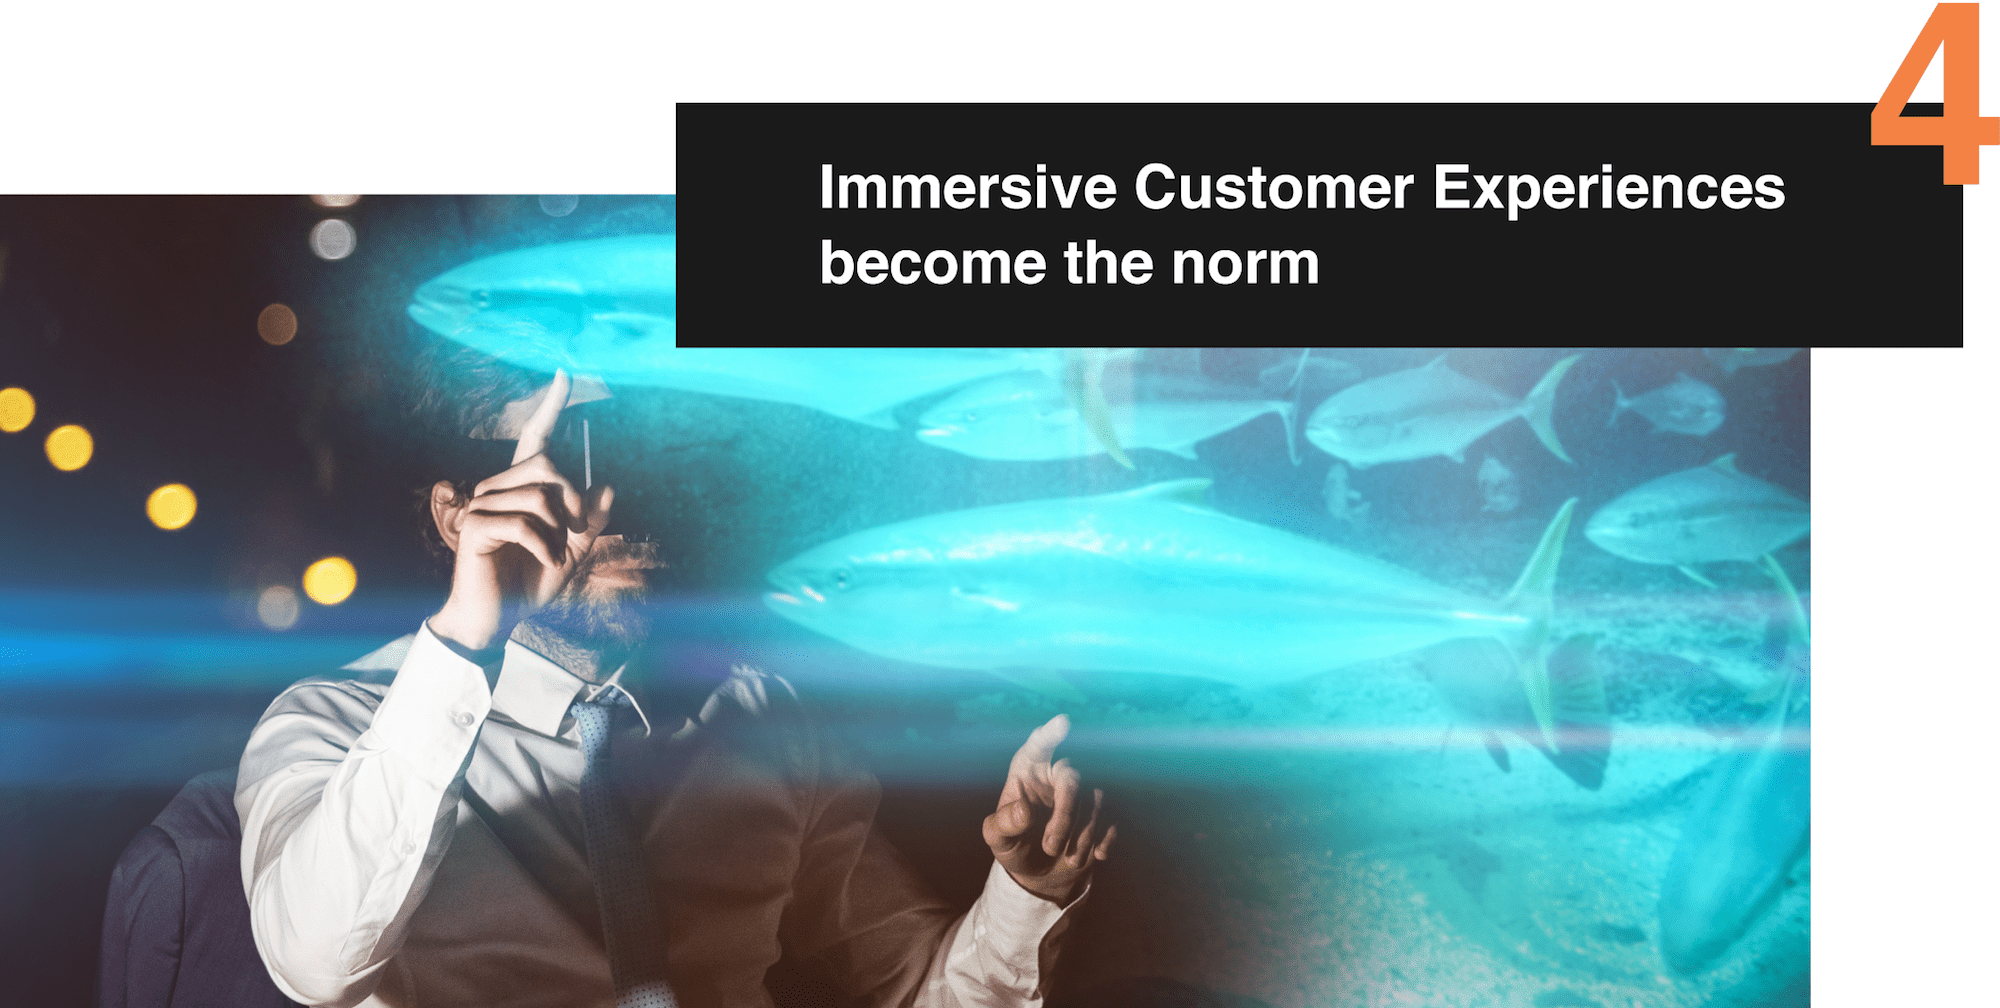 4. Immersive Customer Experiences become the norm